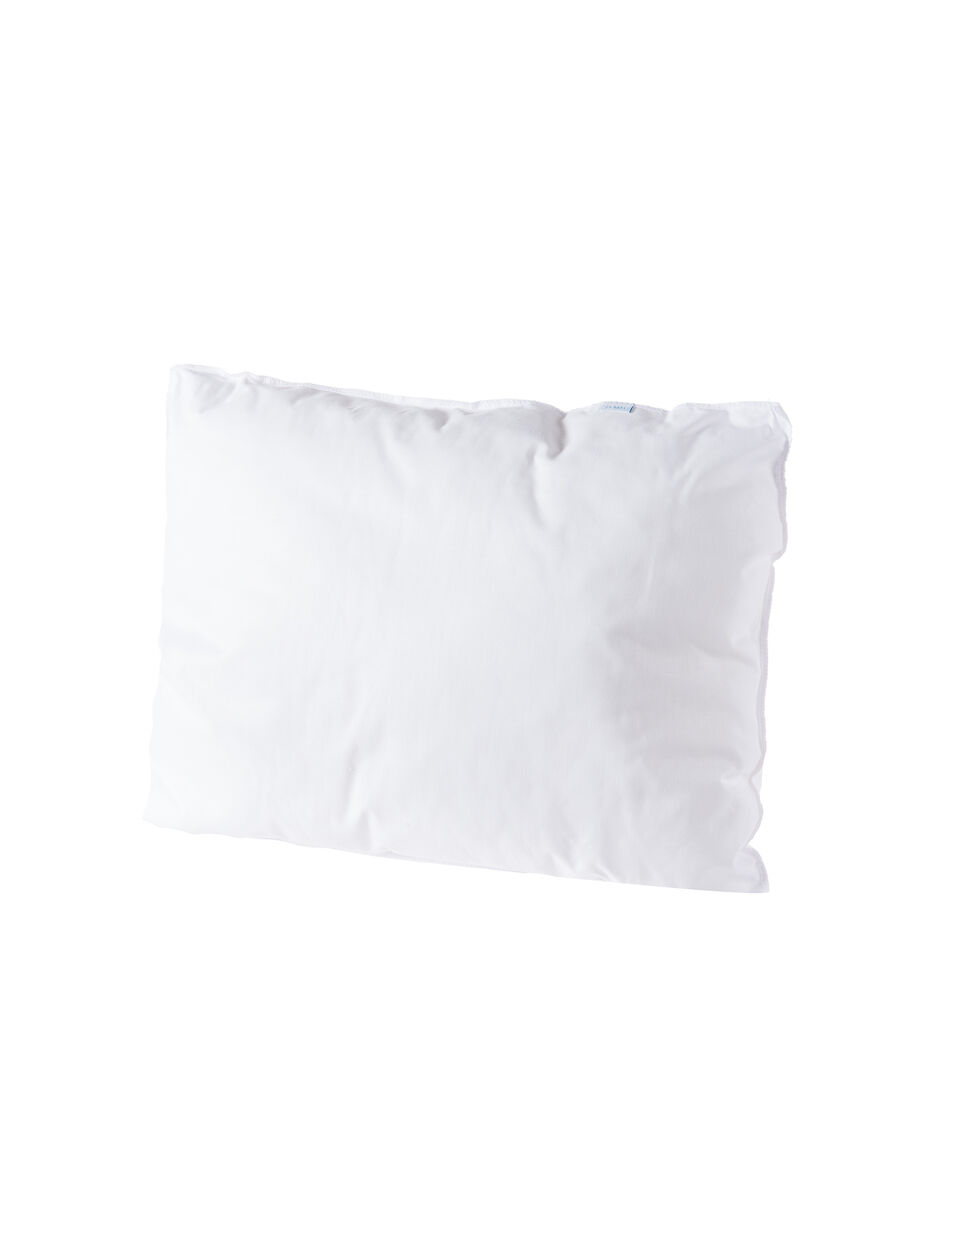 Anti-Allergy Pillow 44x35cm by Zy Baby